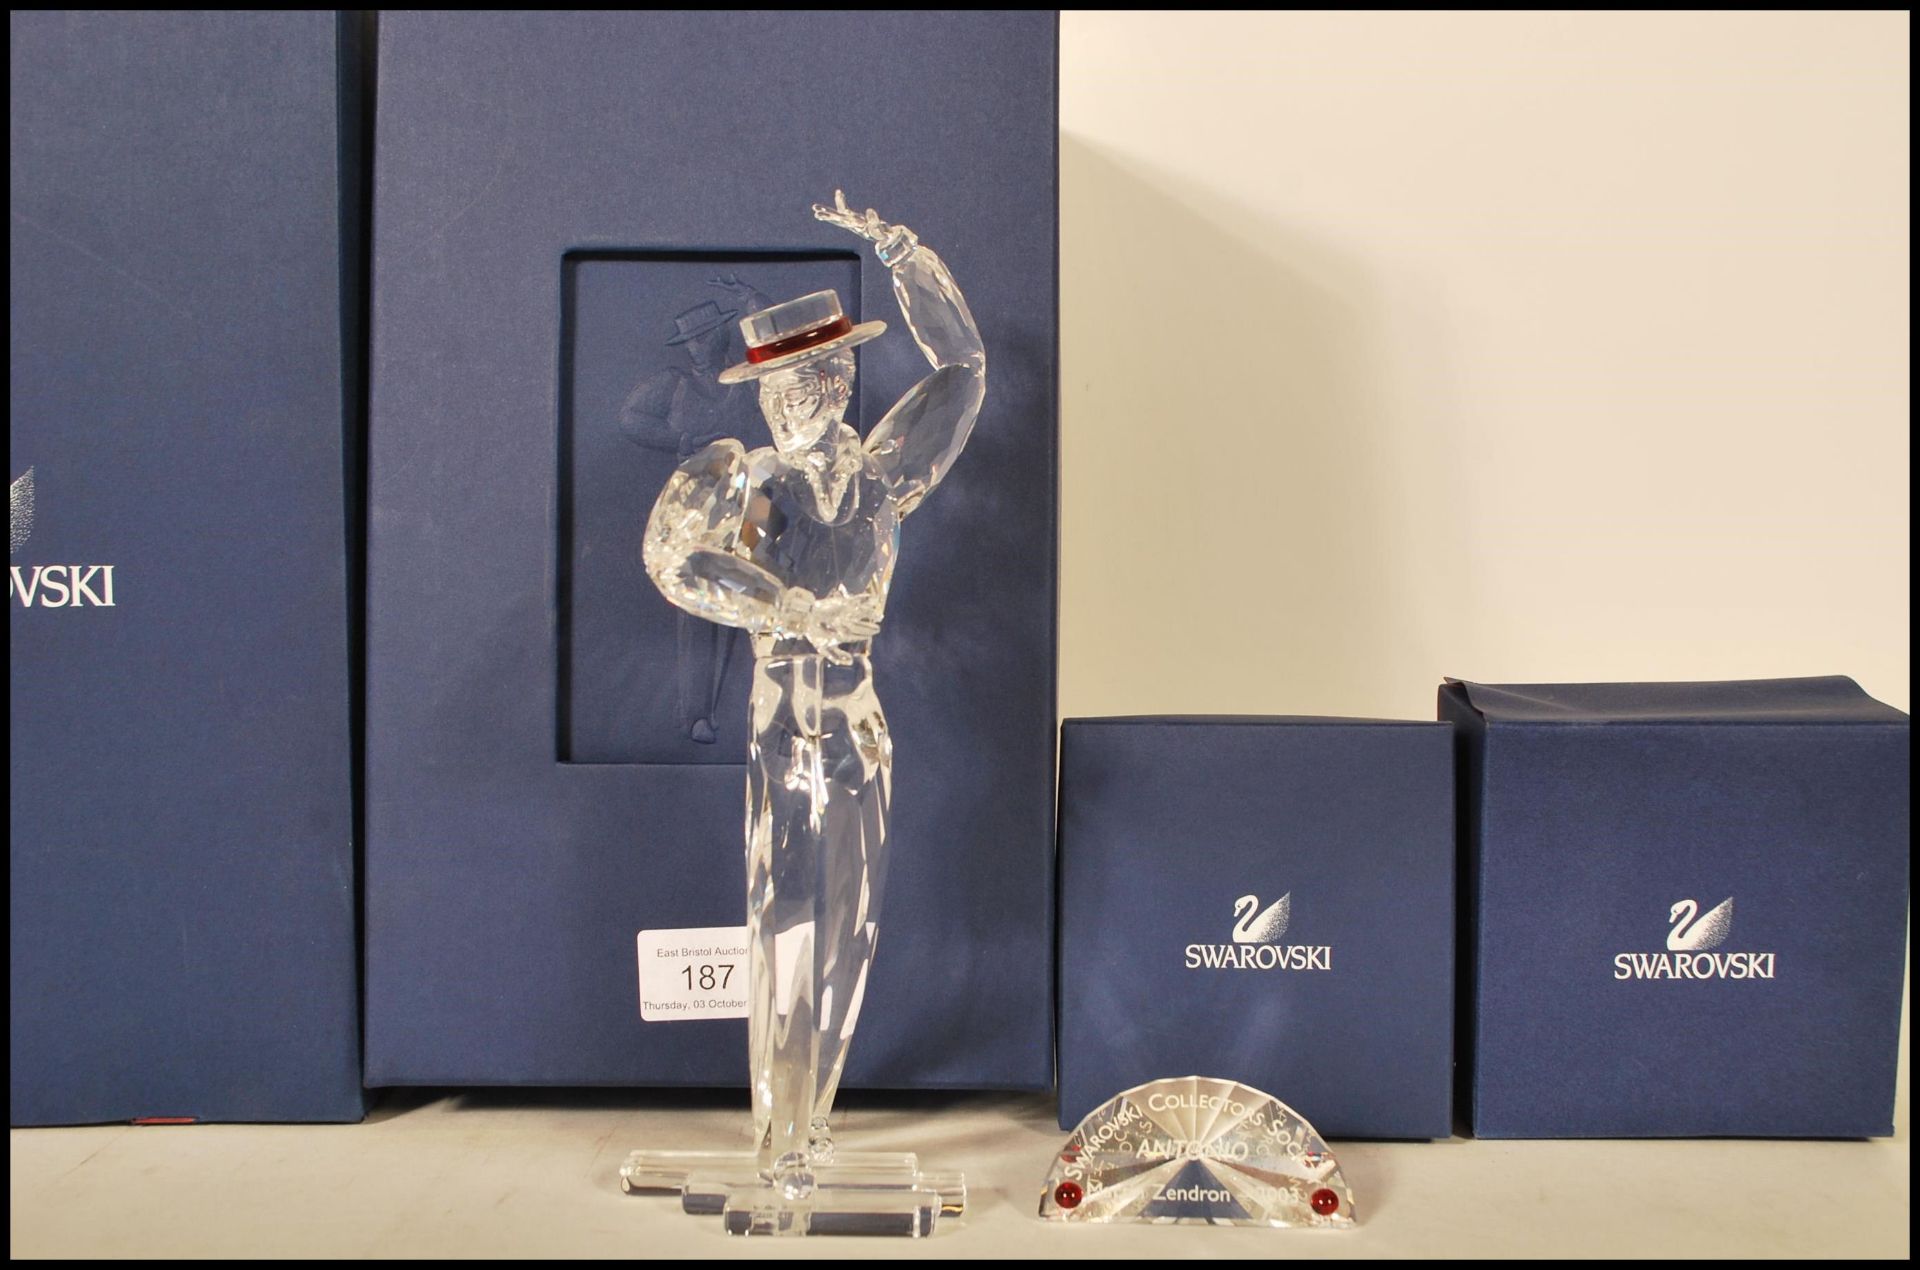 A large Swarovski cut glass crystal figurine in the form of a flamenco dancer with his arms posed,